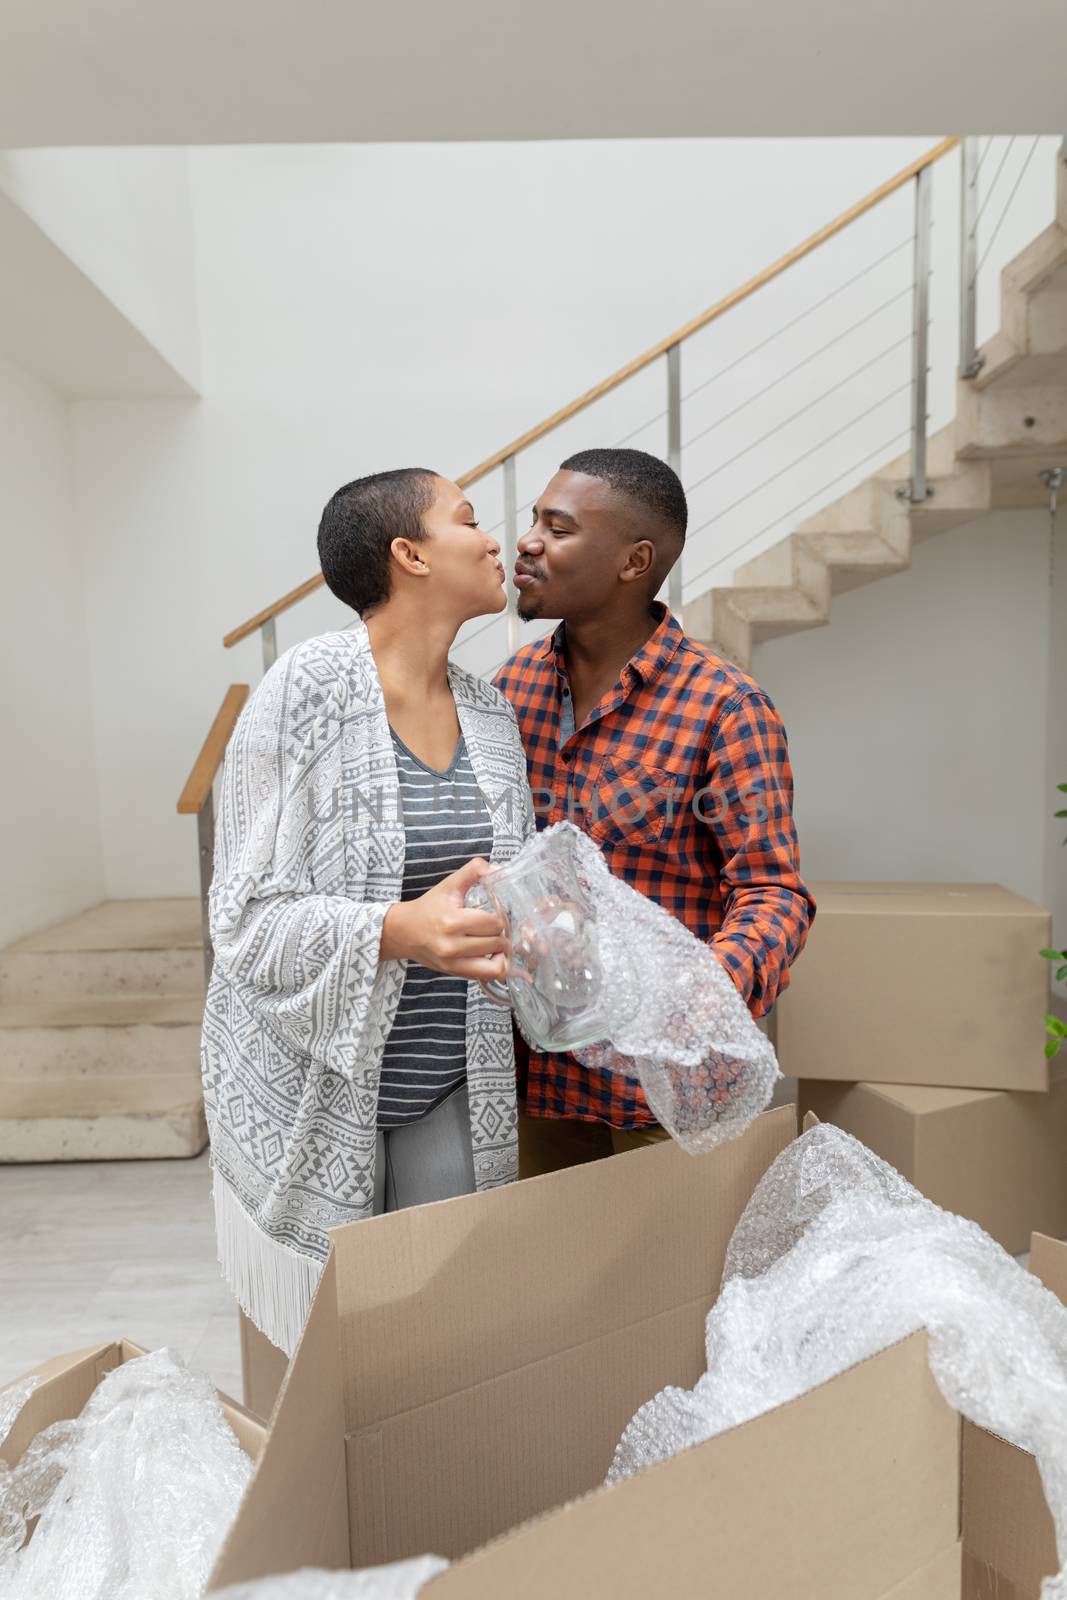 Front view of happy African american couple kissing each other while unpacking cardboard boxes in living room at home